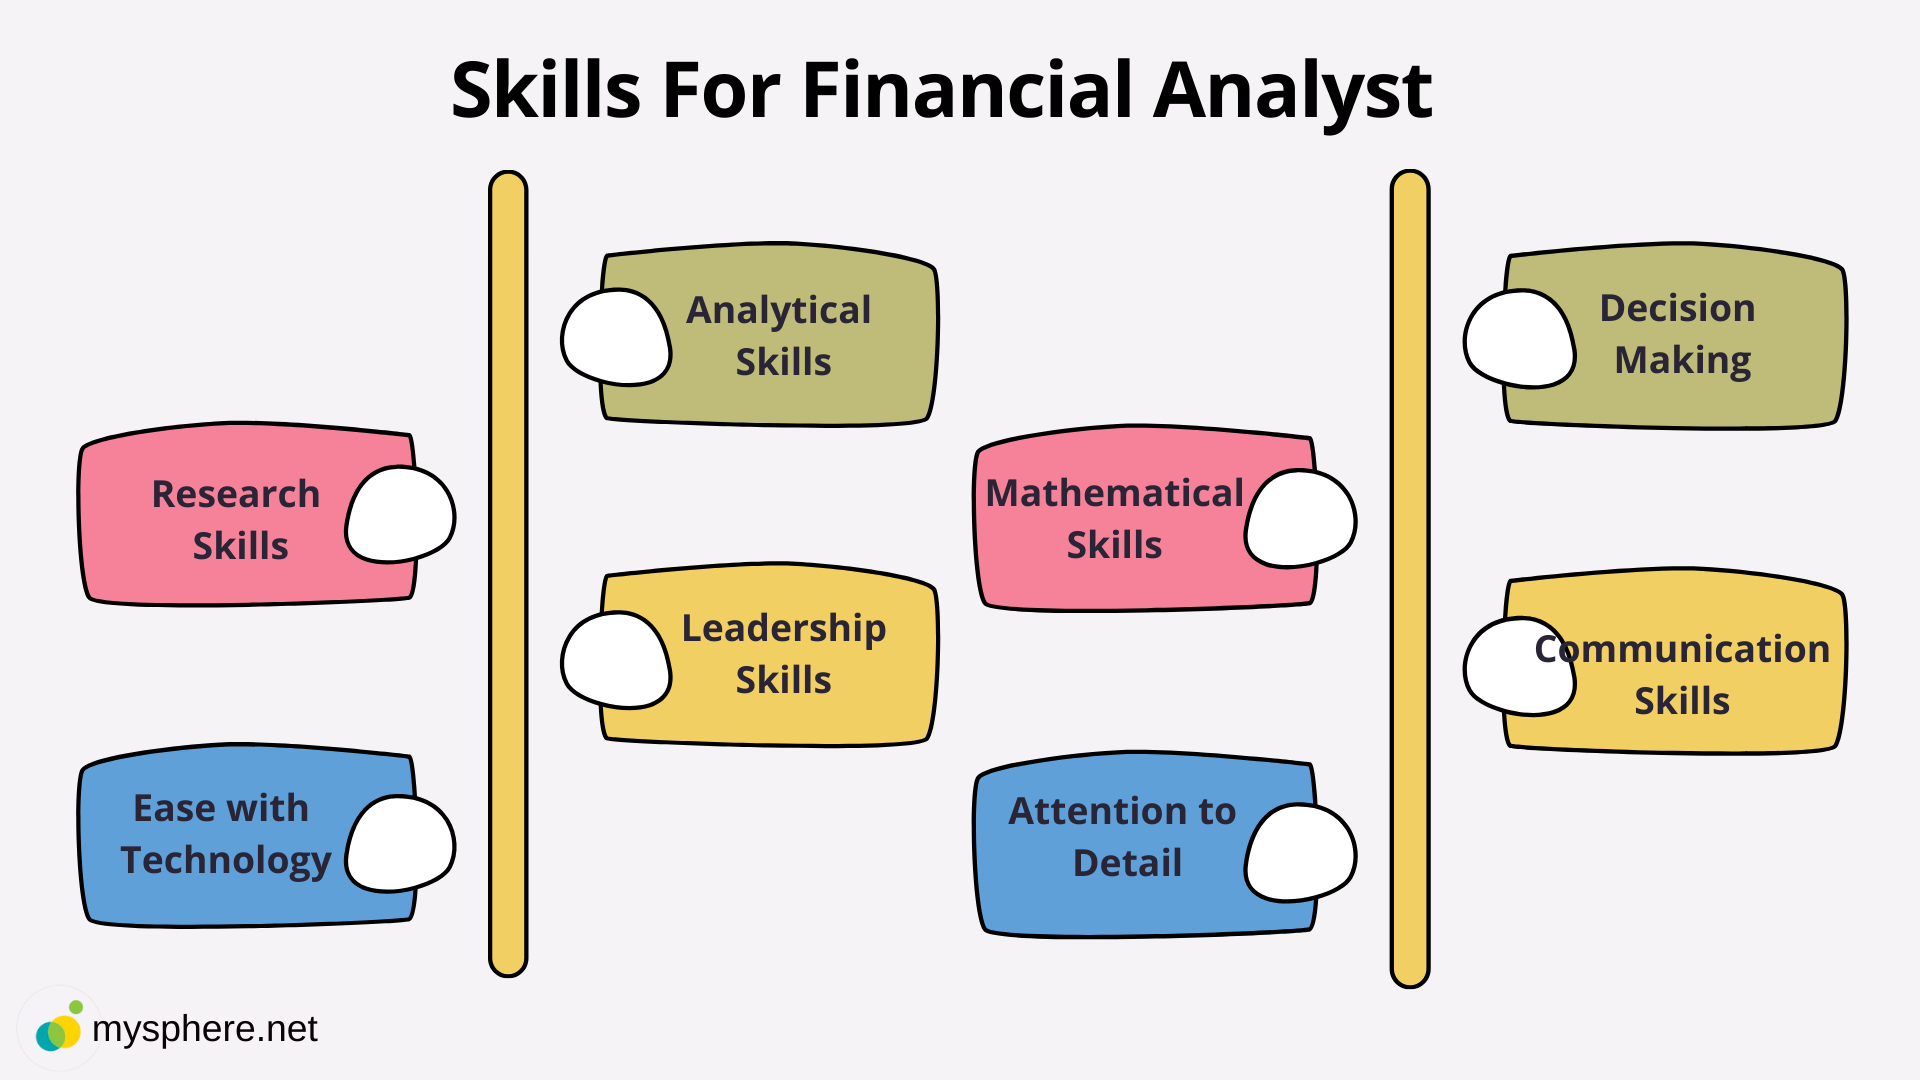 Skills for financial analyst